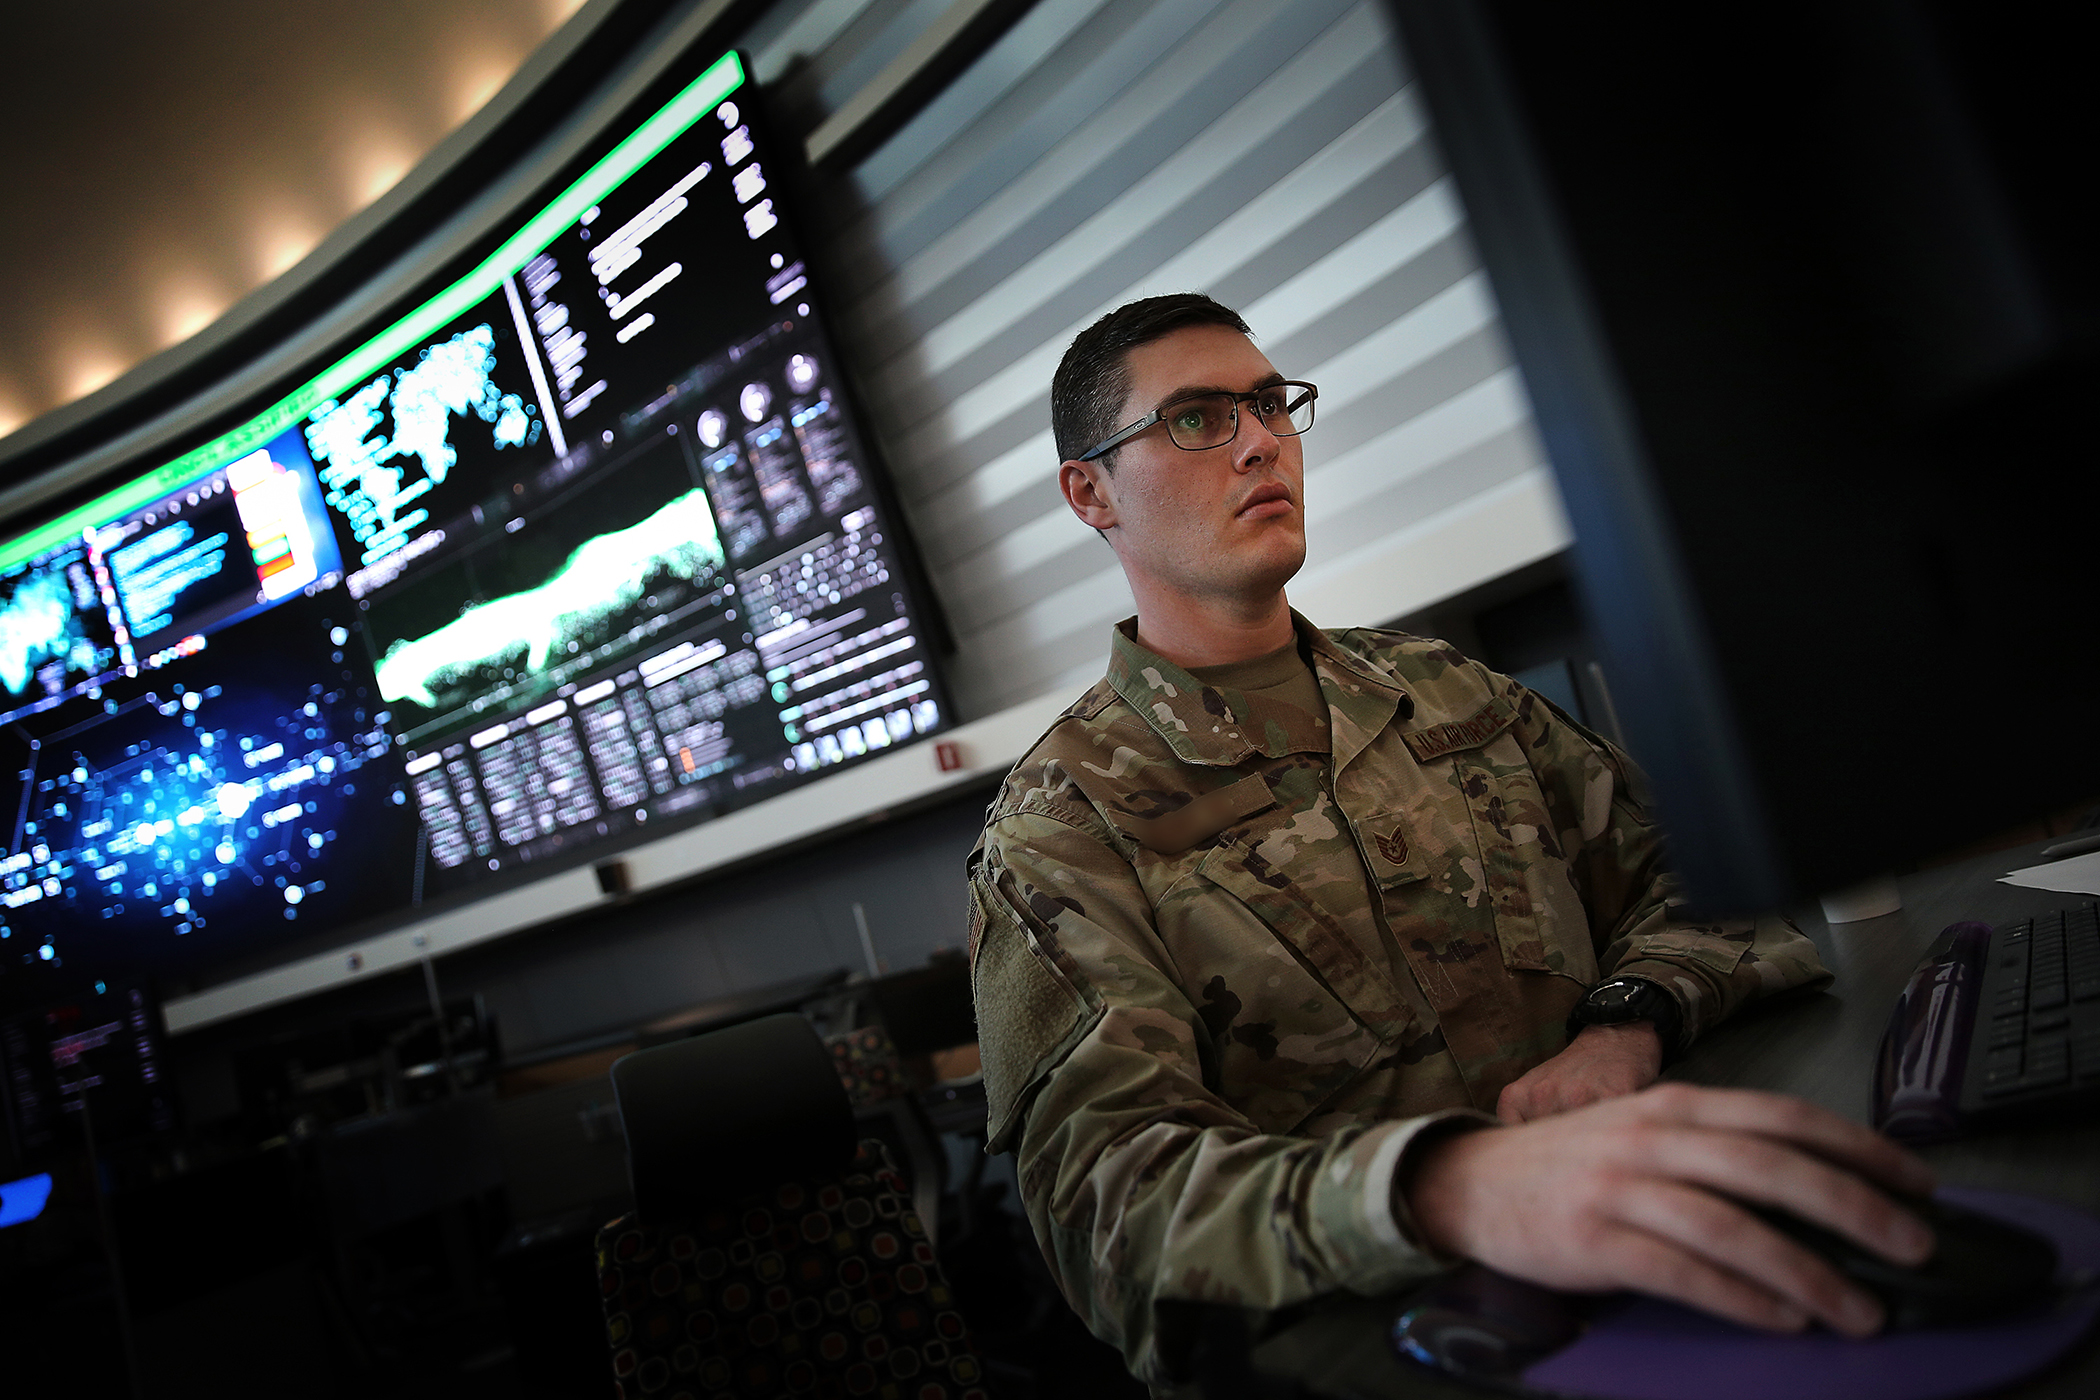 A soldier sits at a table and looks at a laptop screen with his hands on the keyboard.